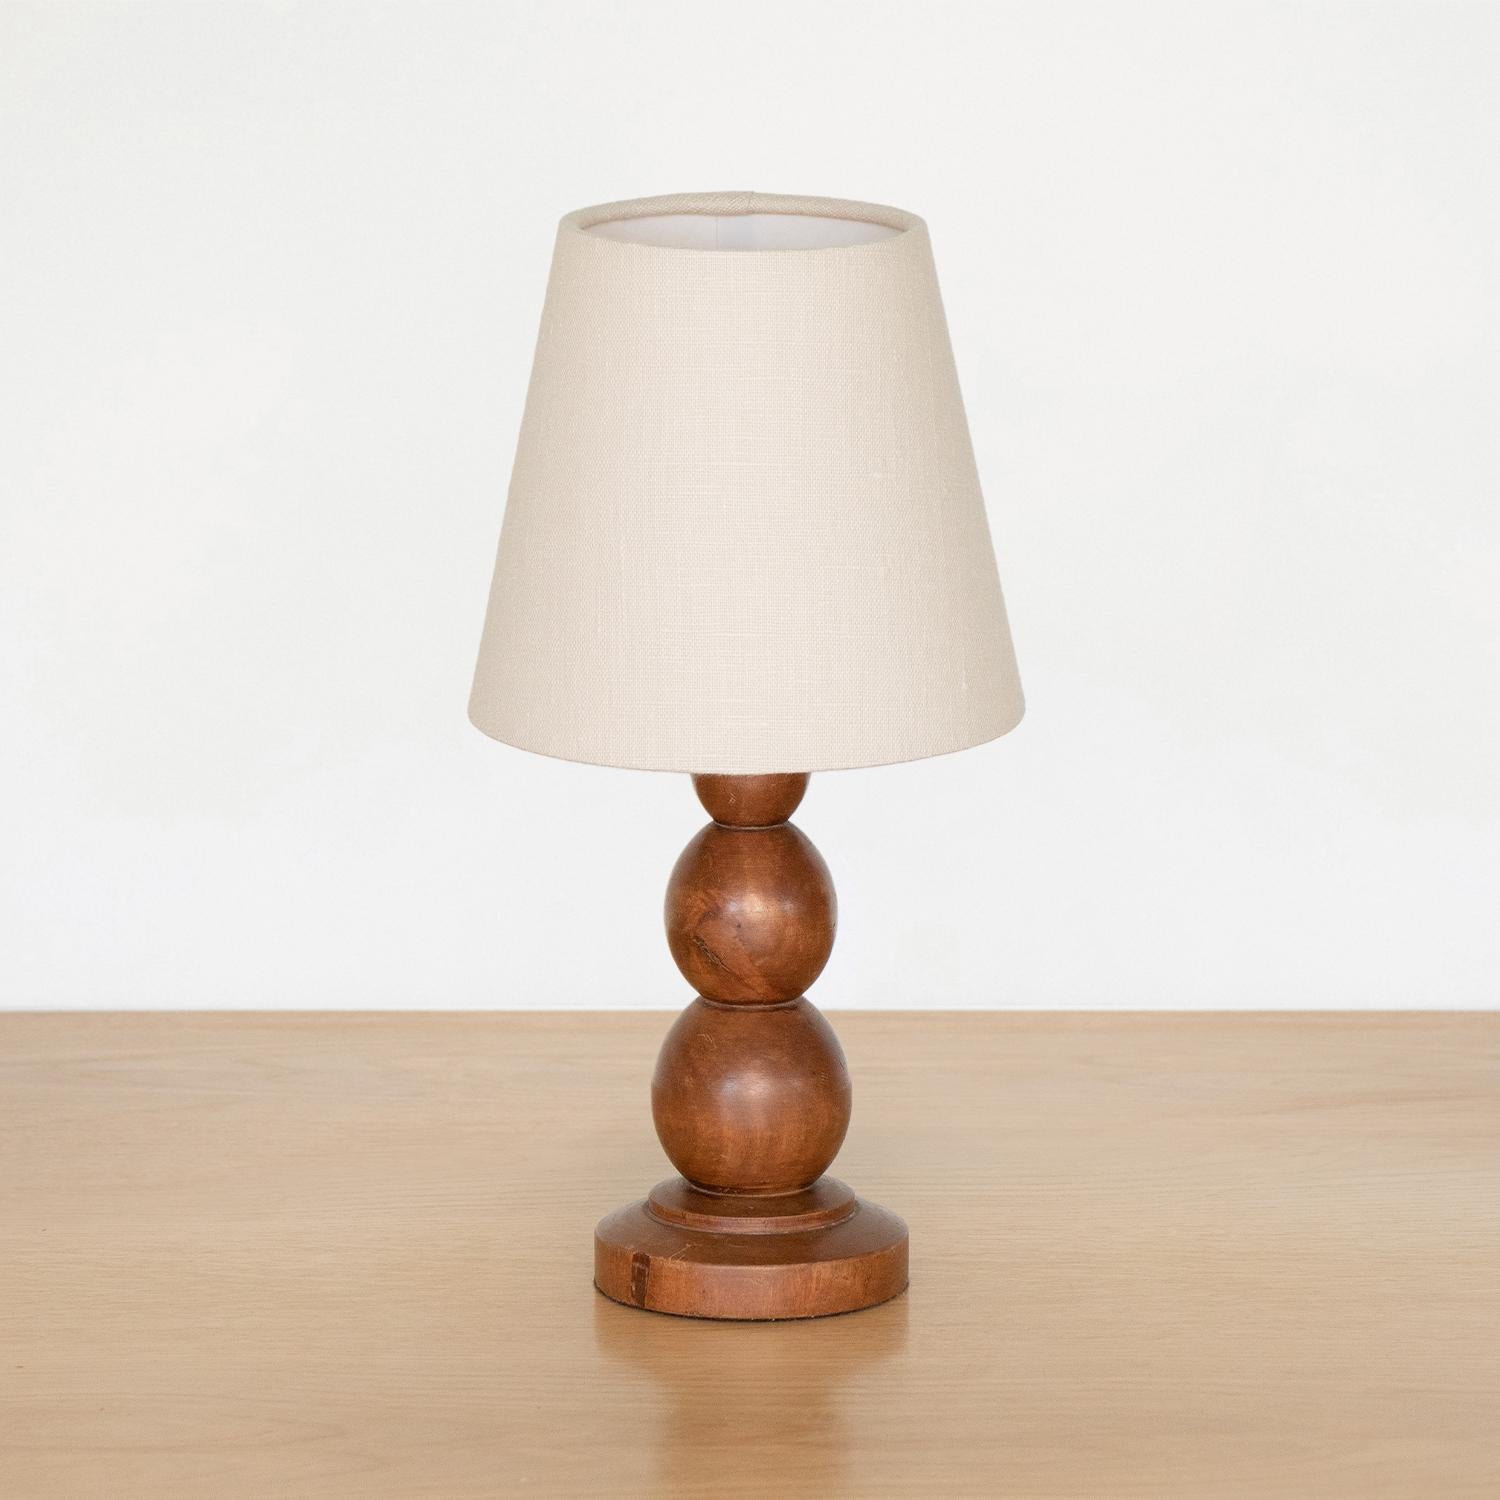 Petite wood table lamp from France, 1940s. Stacked ball forms with circular base and original wood finish. New linen shade and newly re-wired.